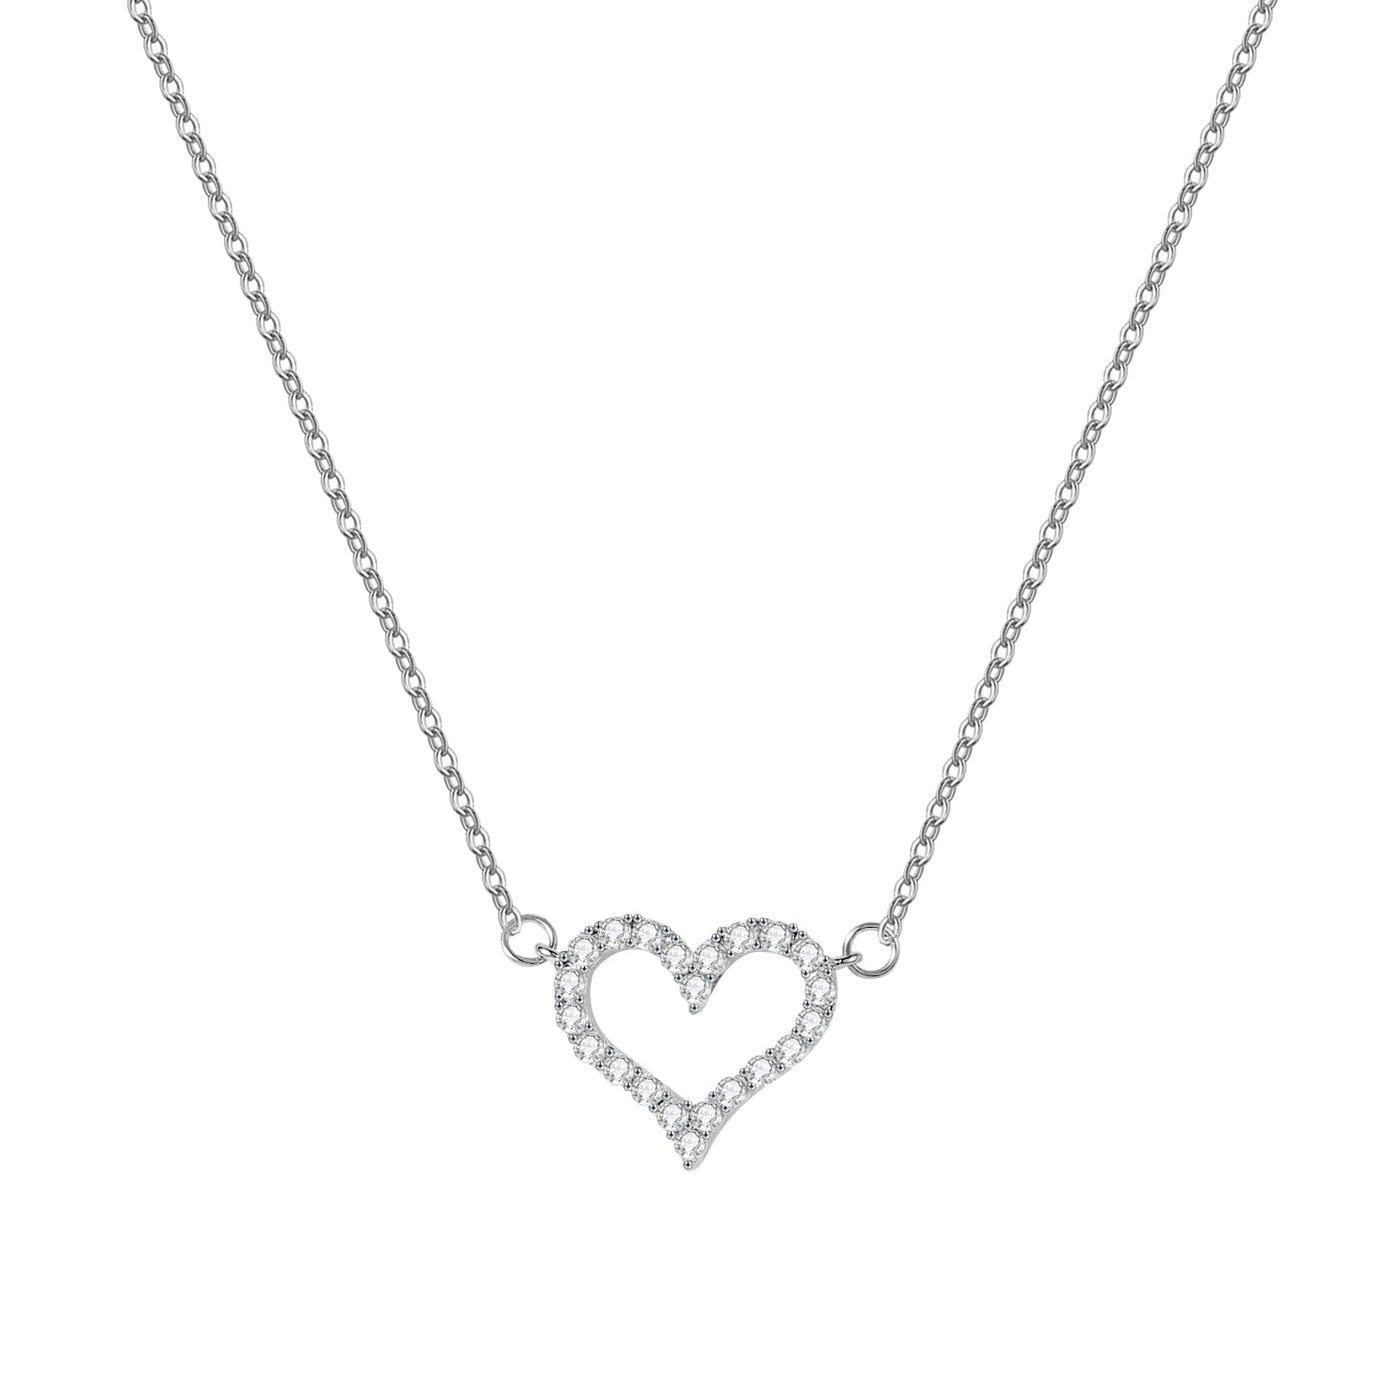 Gift for Sassy Sister - Love Heart Necklace - HouseofLx-18K Yellow Gold